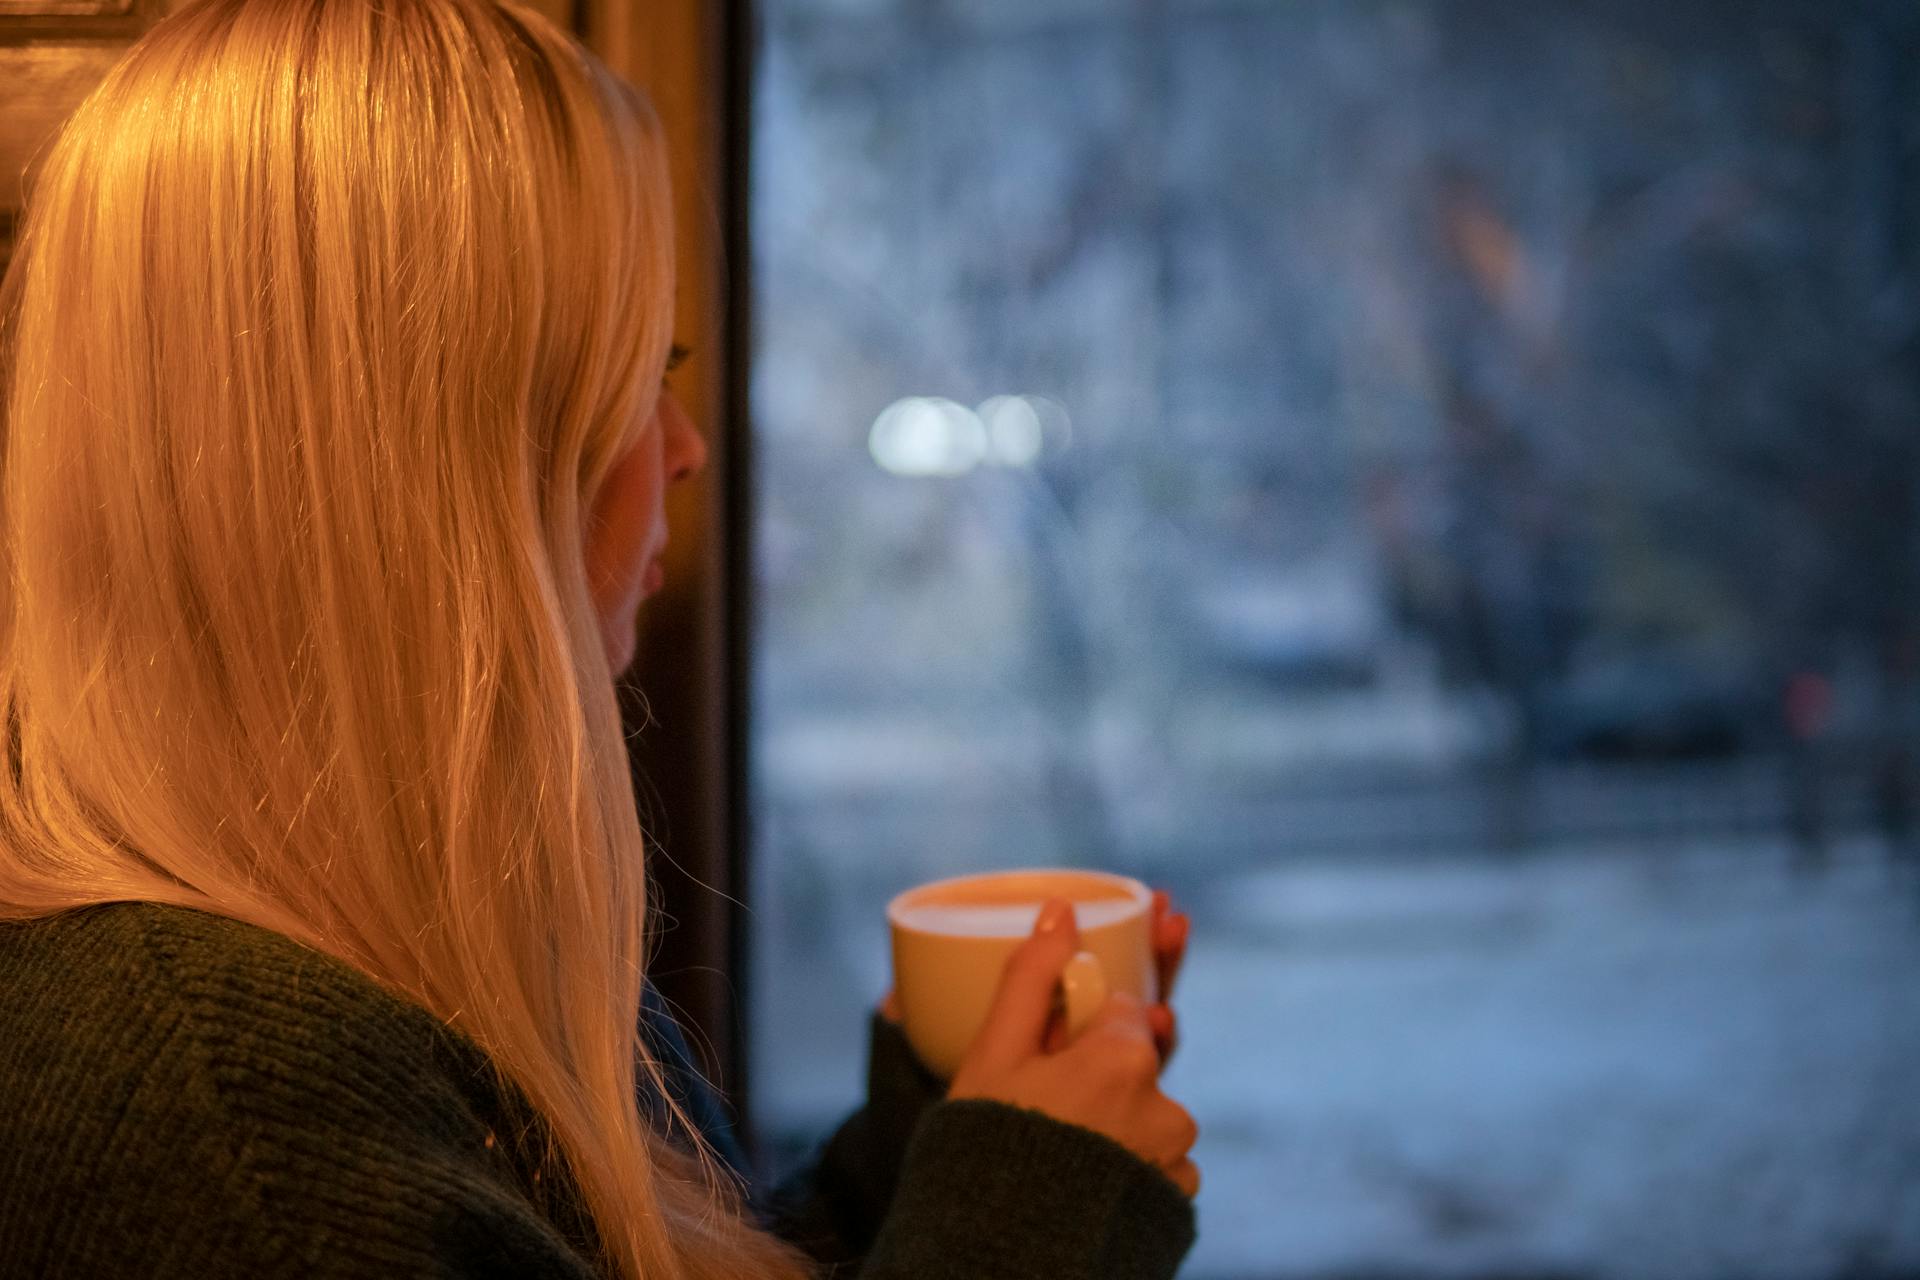 A woman looking out the window | Source: Pexels